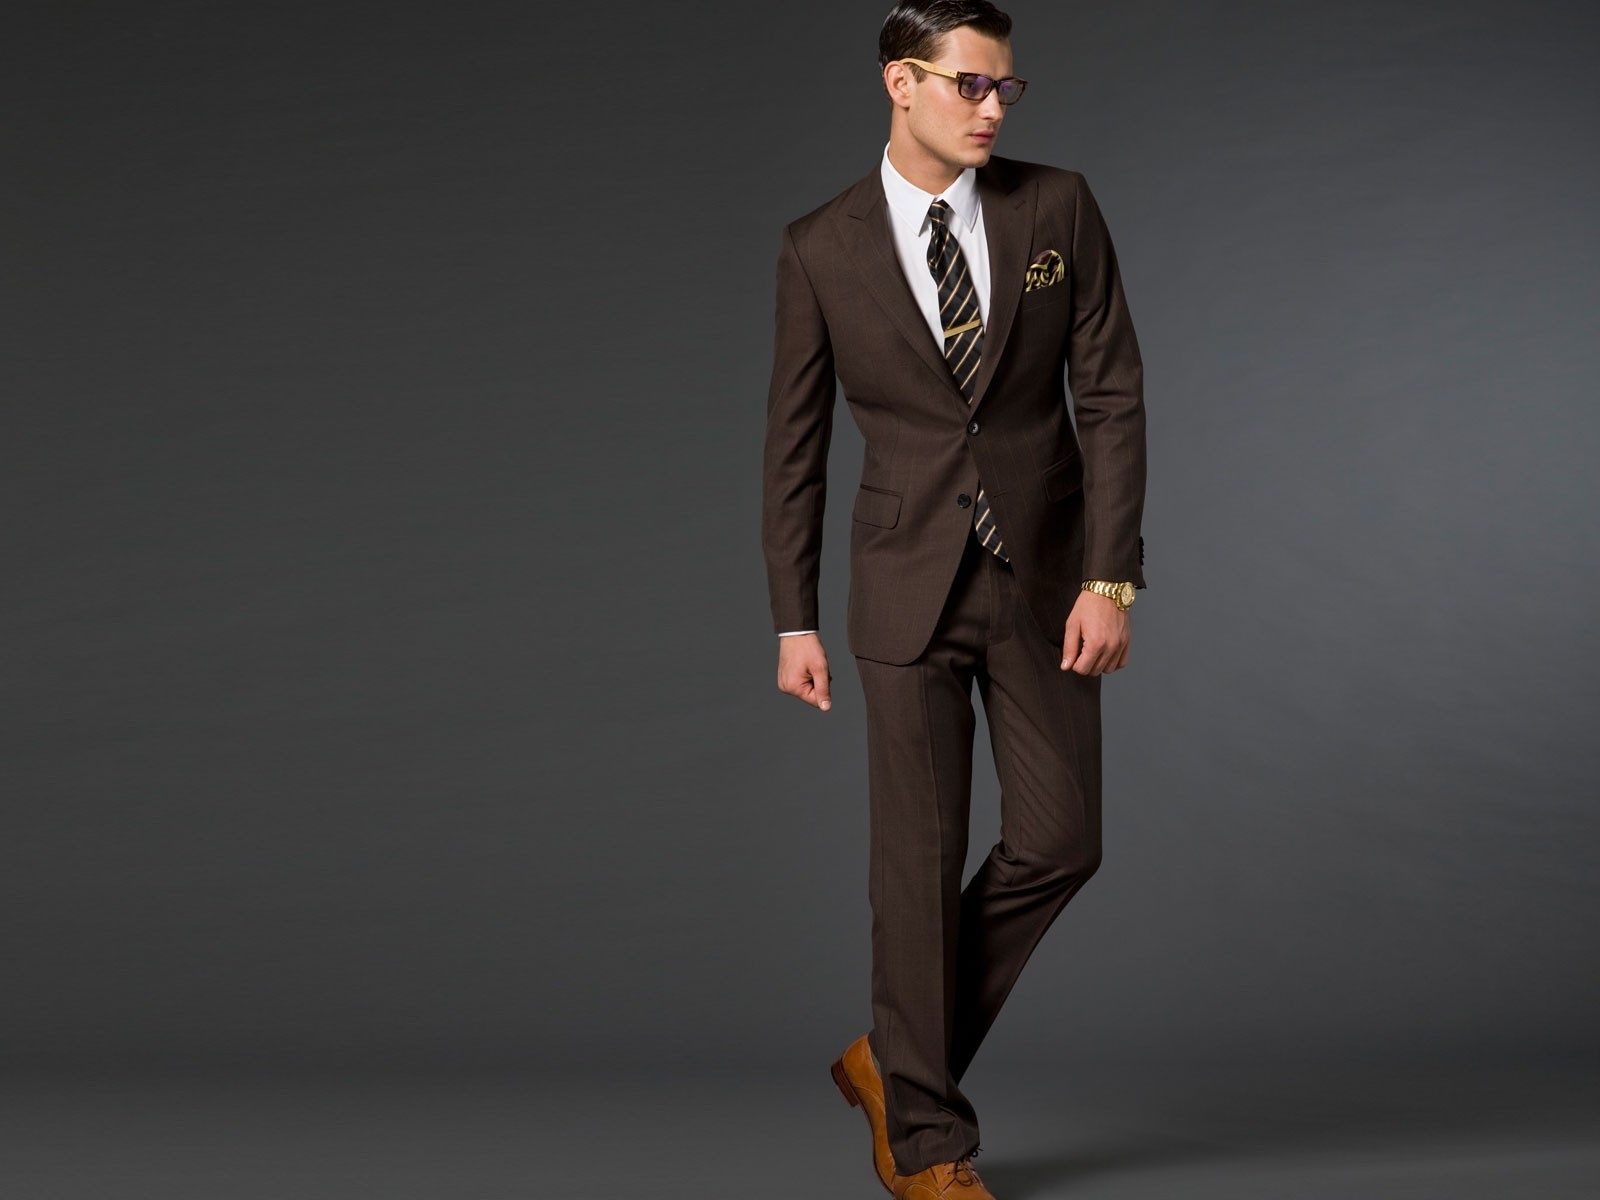 What Color Shoes to Wear With Your Suits? - 8 Combinations For Men